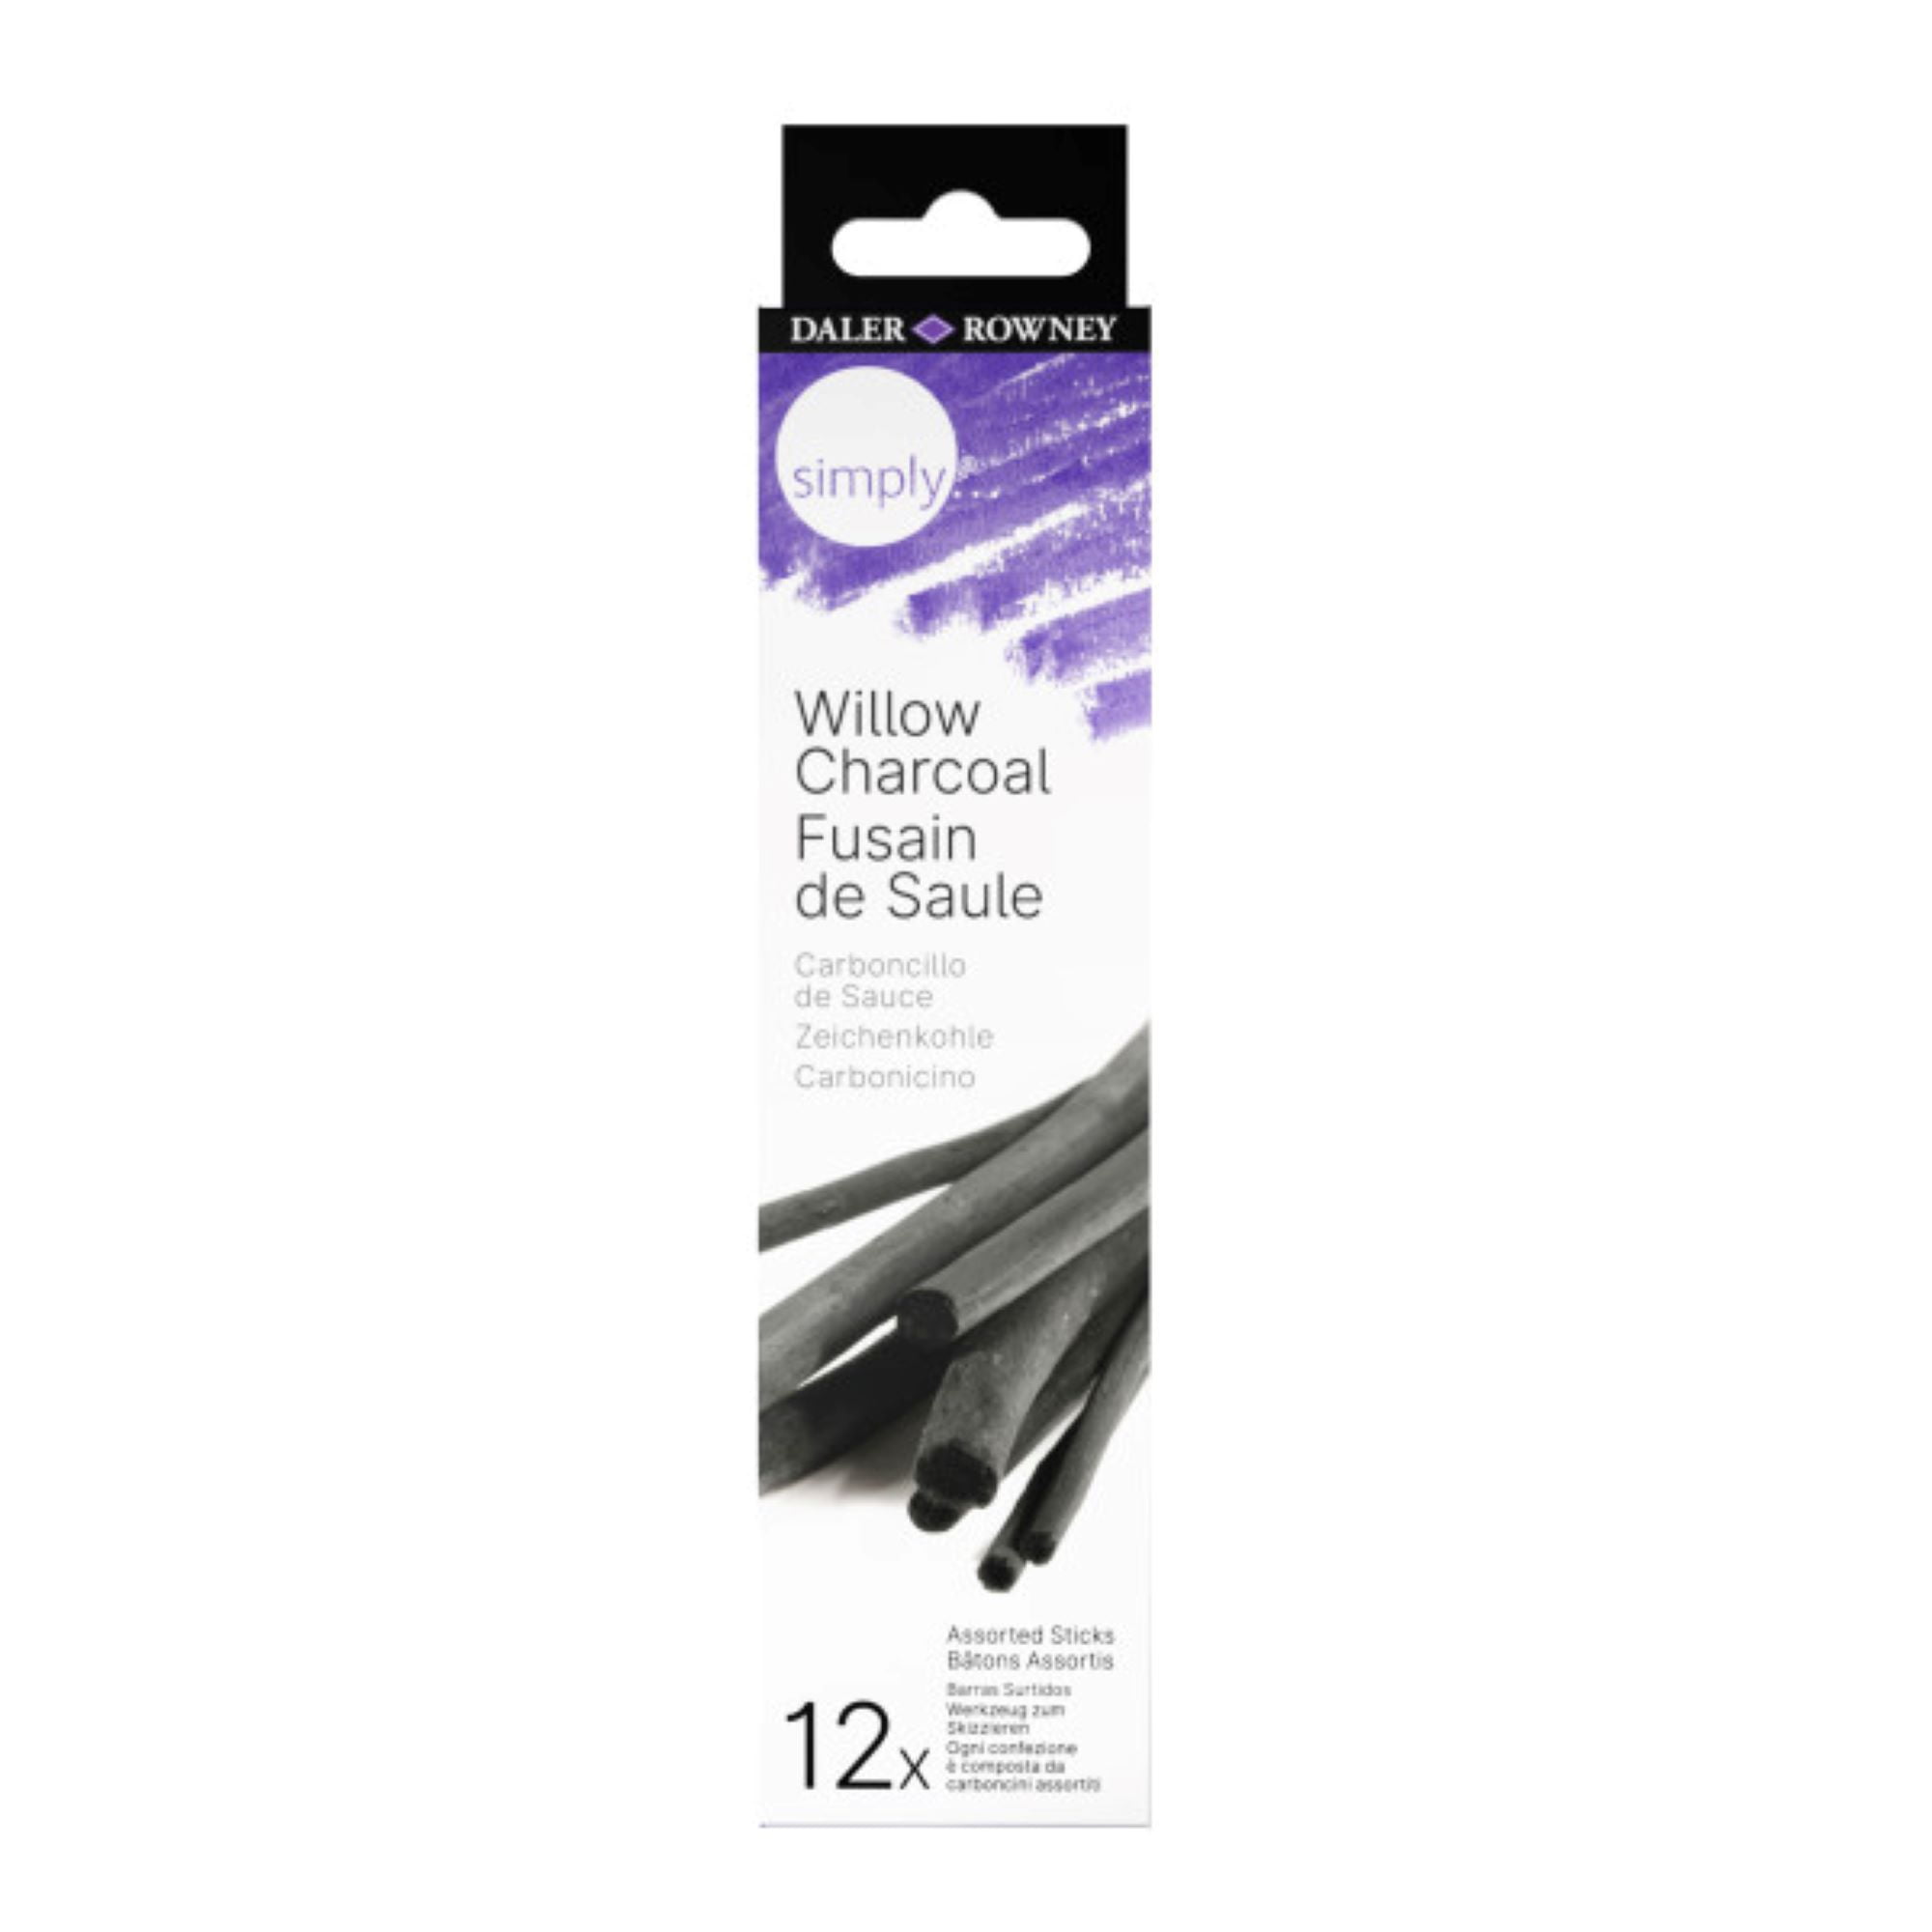  Willow Charcoal Sticks for Drawing - Set of 20 Sticks